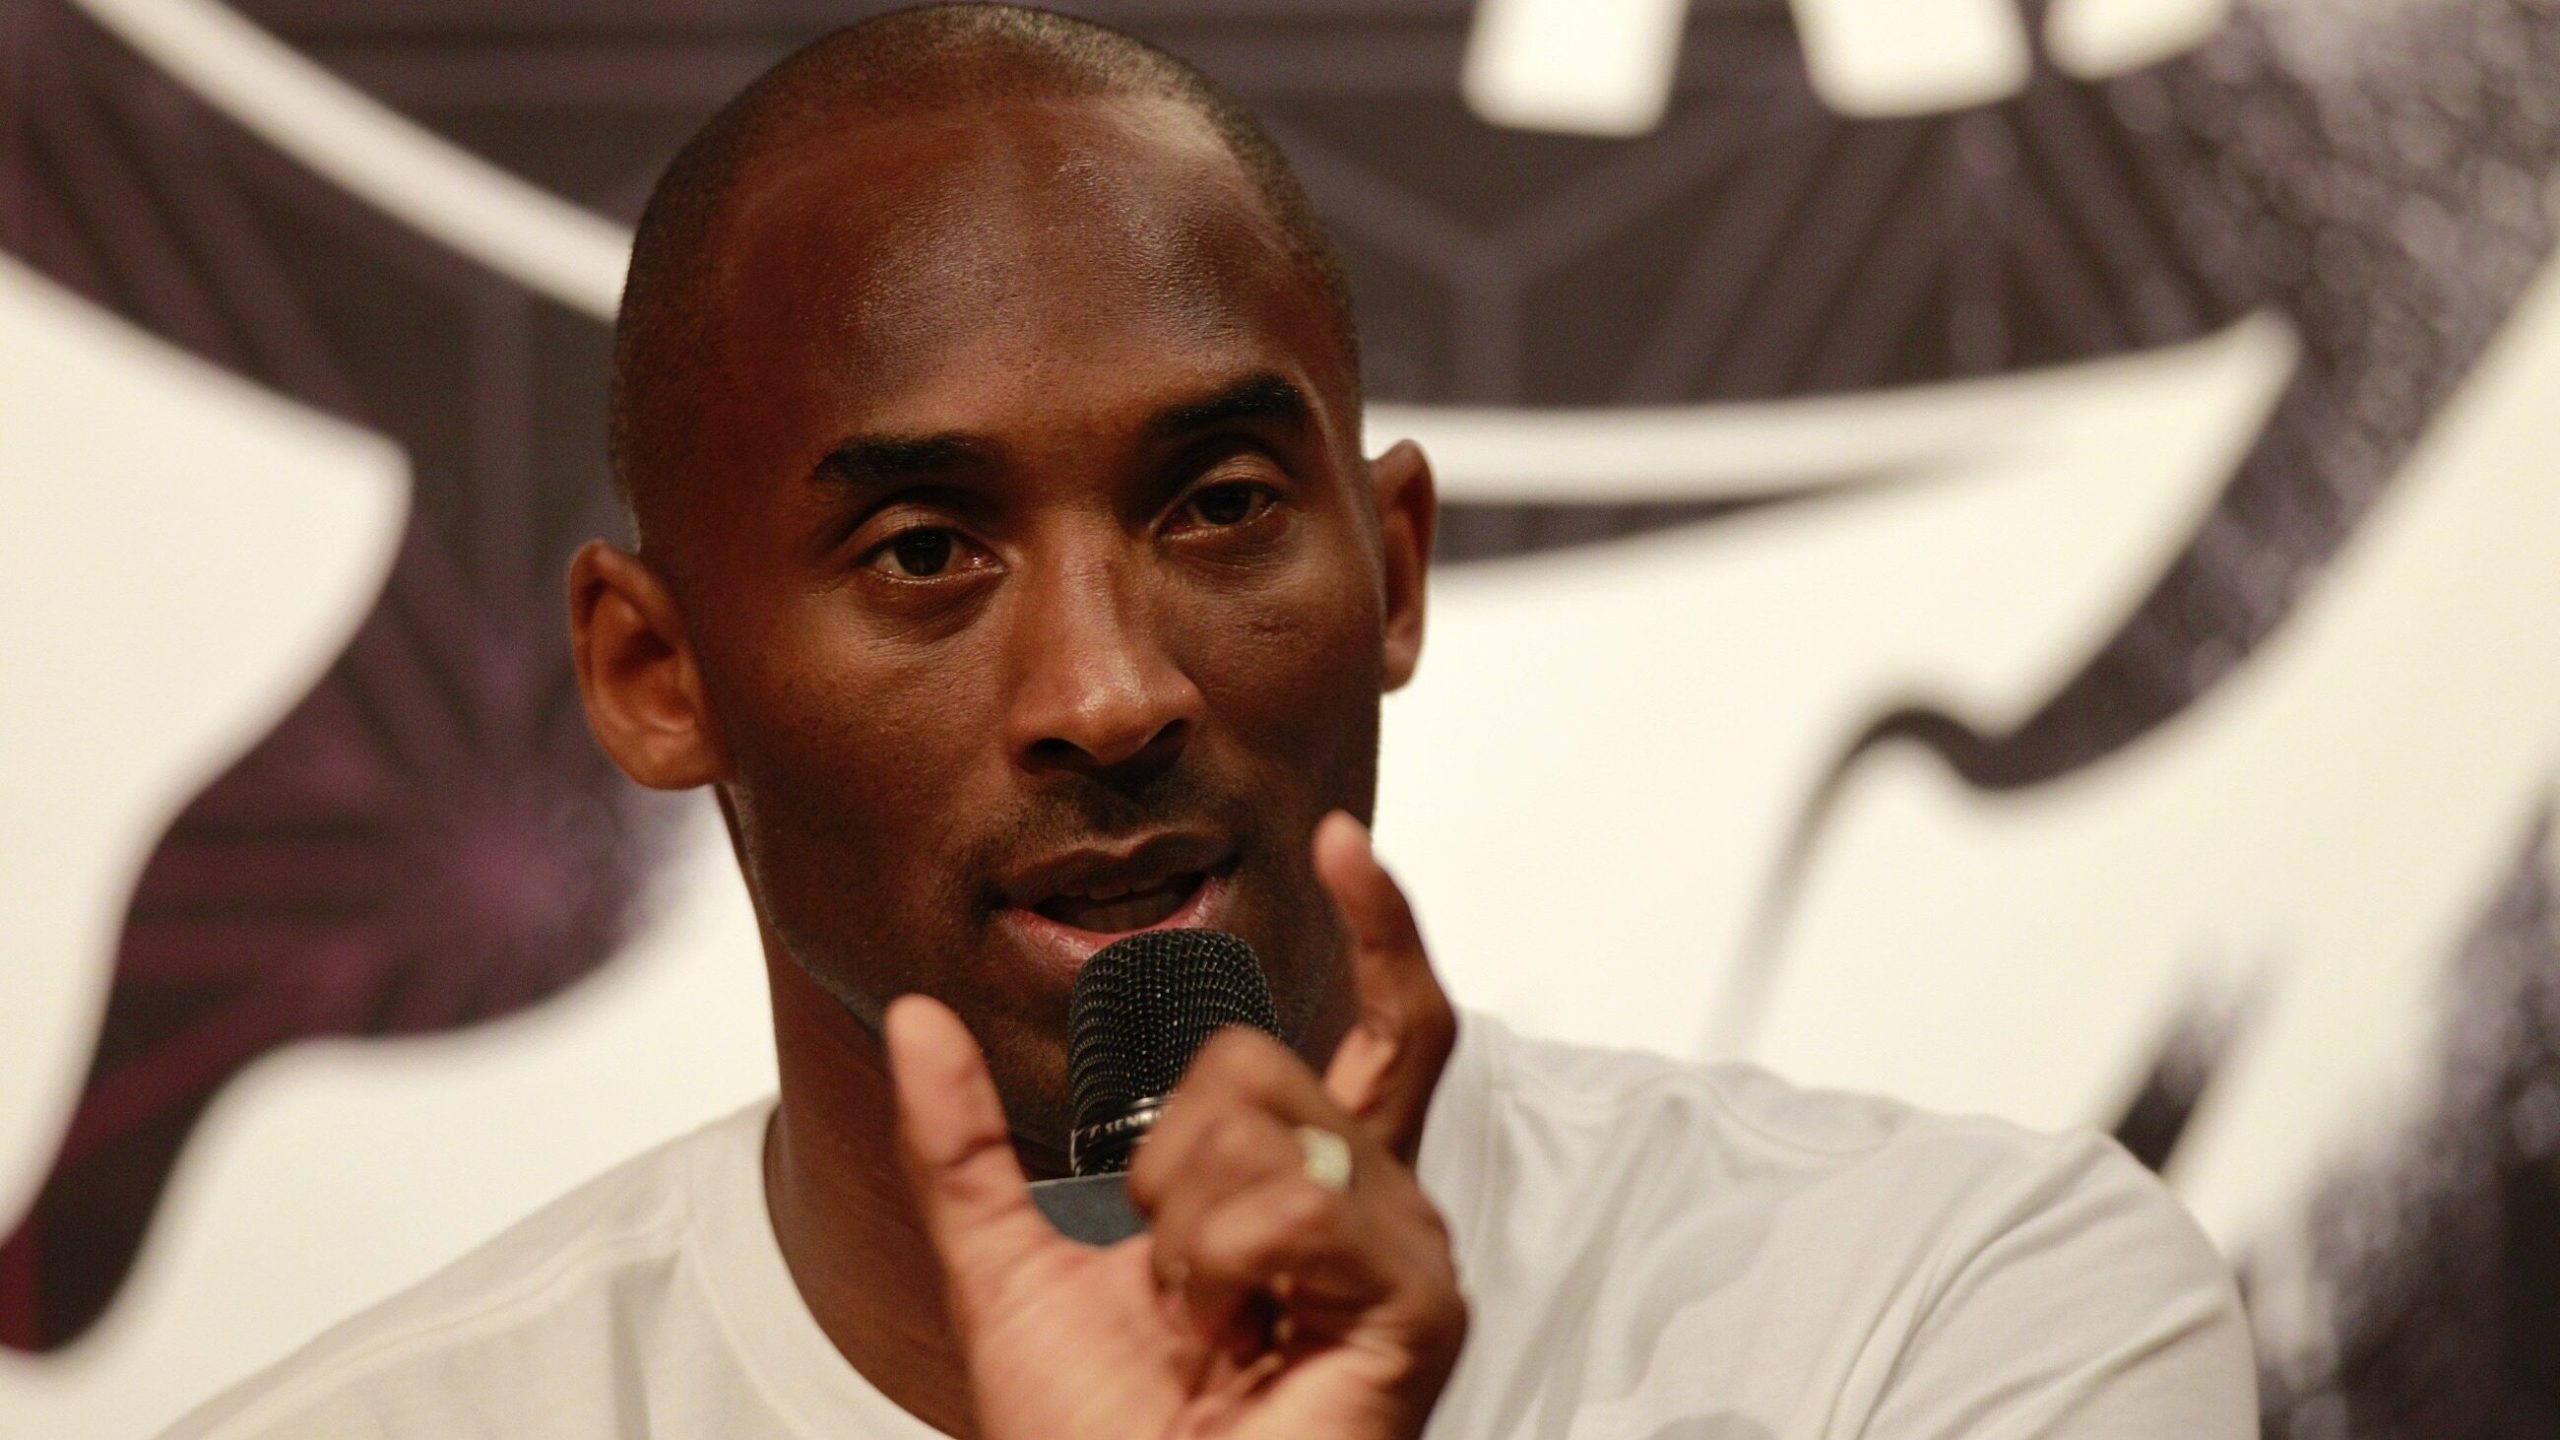 This is how Kobe Bryant trained.  Not many could do it